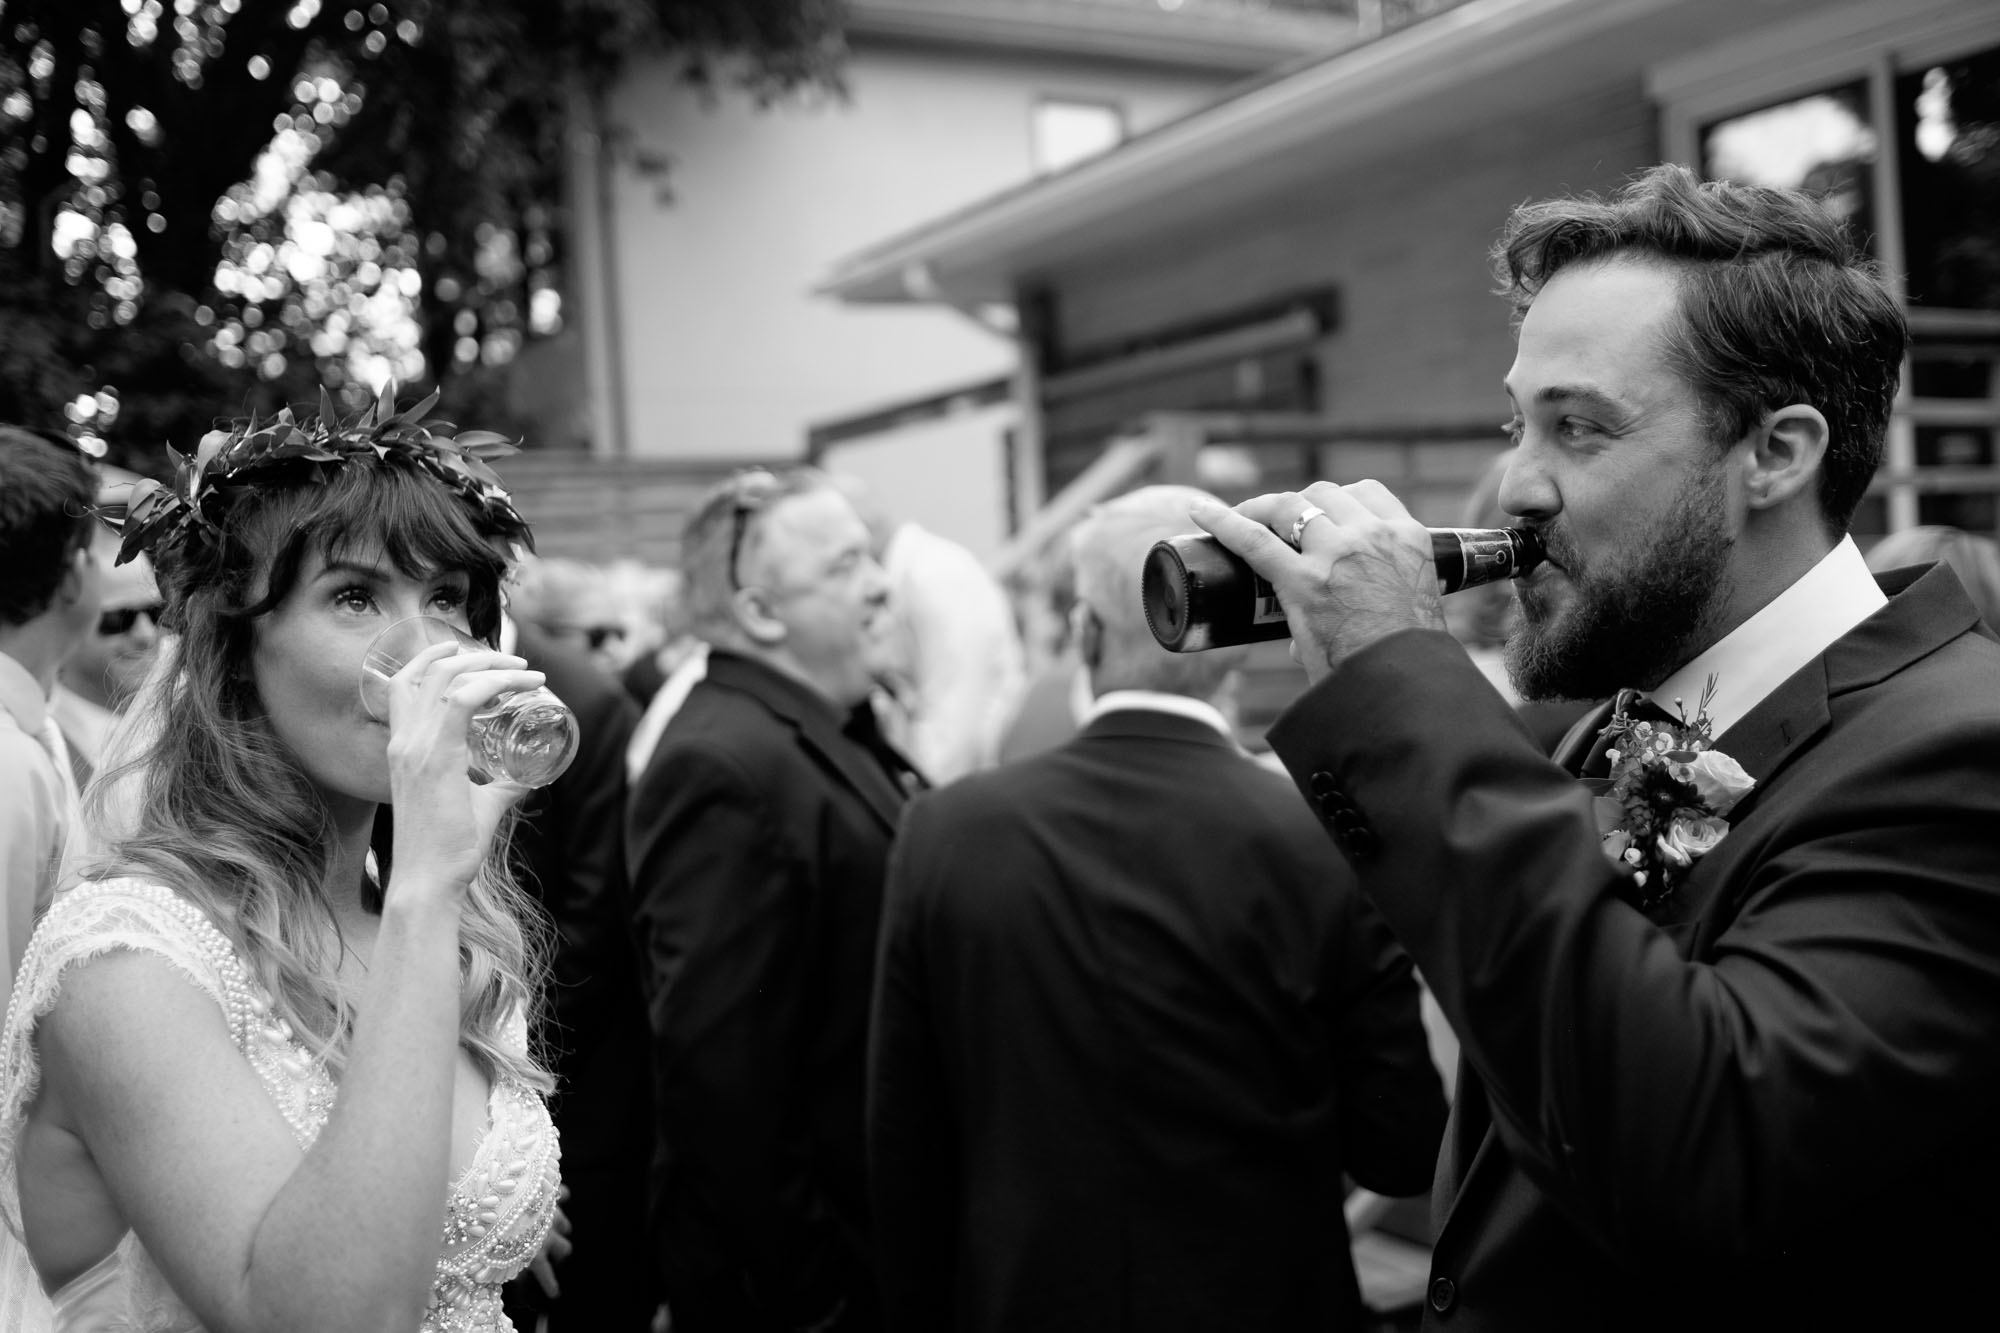  Kristin &amp; Adam share a drink right after their outdoor wedding ceremony during their backyard wedding in Barrie, Ontario. &nbsp;Photograph by Scott Williams. 